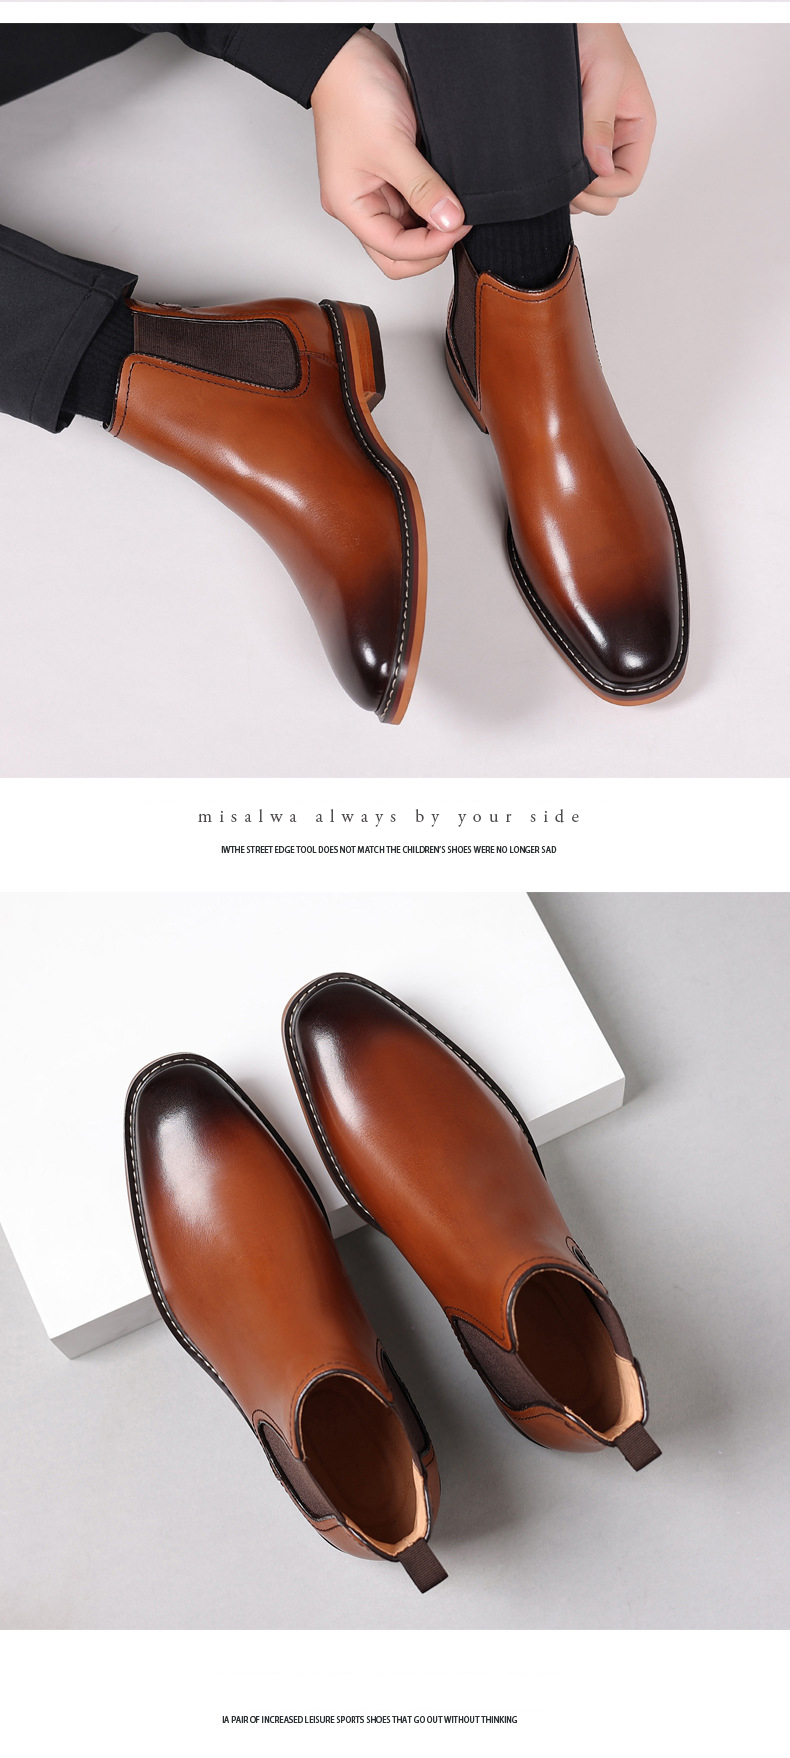 come4buy.com-Genuine Leather Brown Men Chelsea Boots